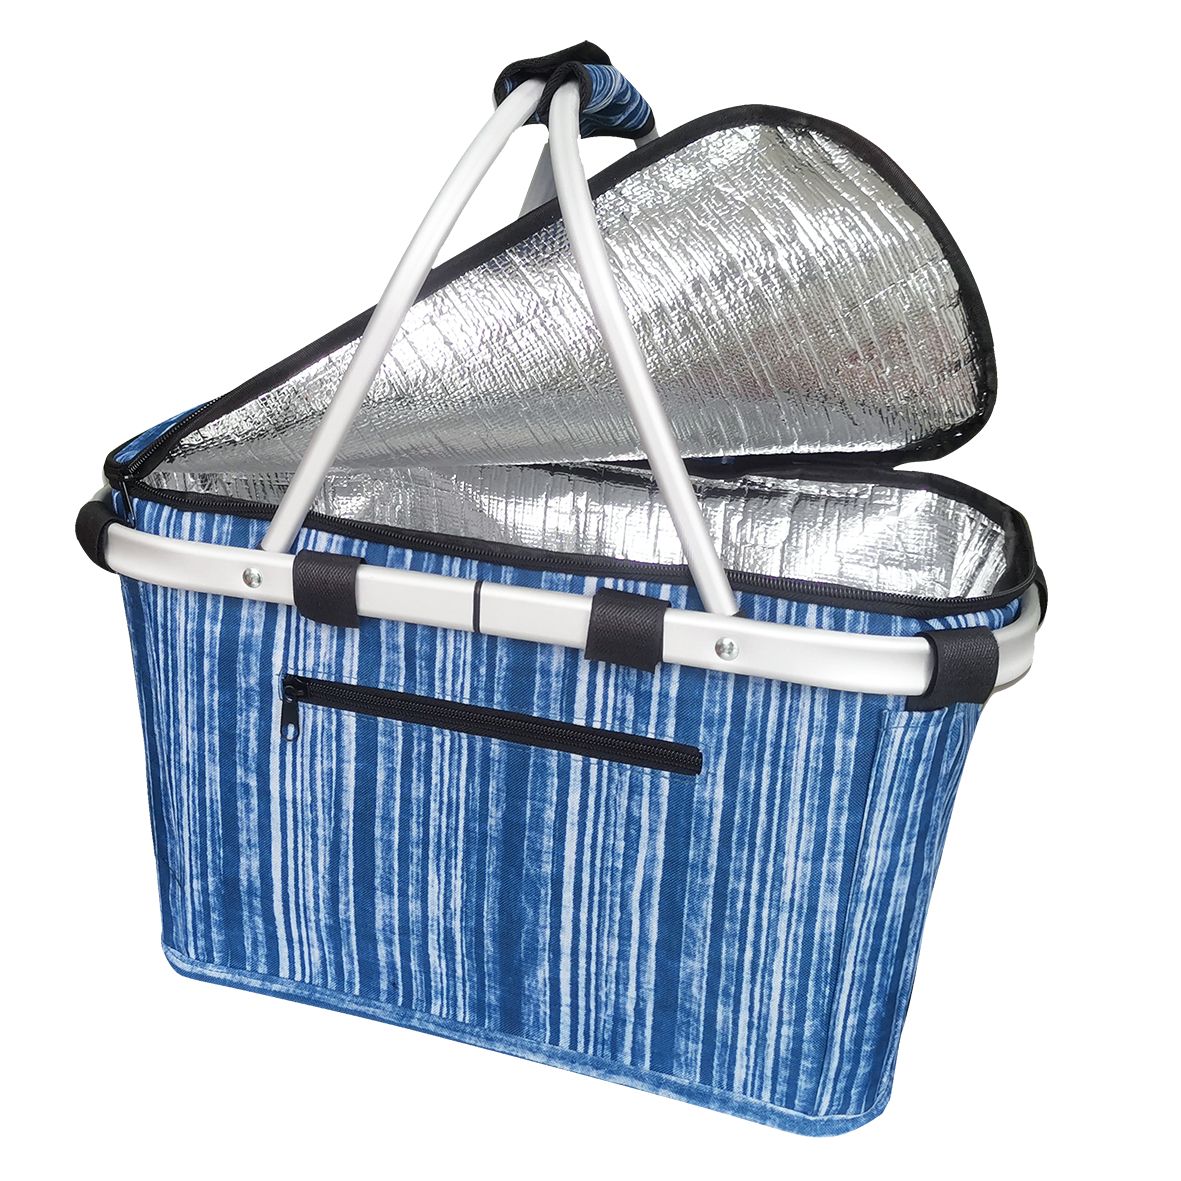 SACHI INSULATED CARRY BASKET W/ LID - BLUE